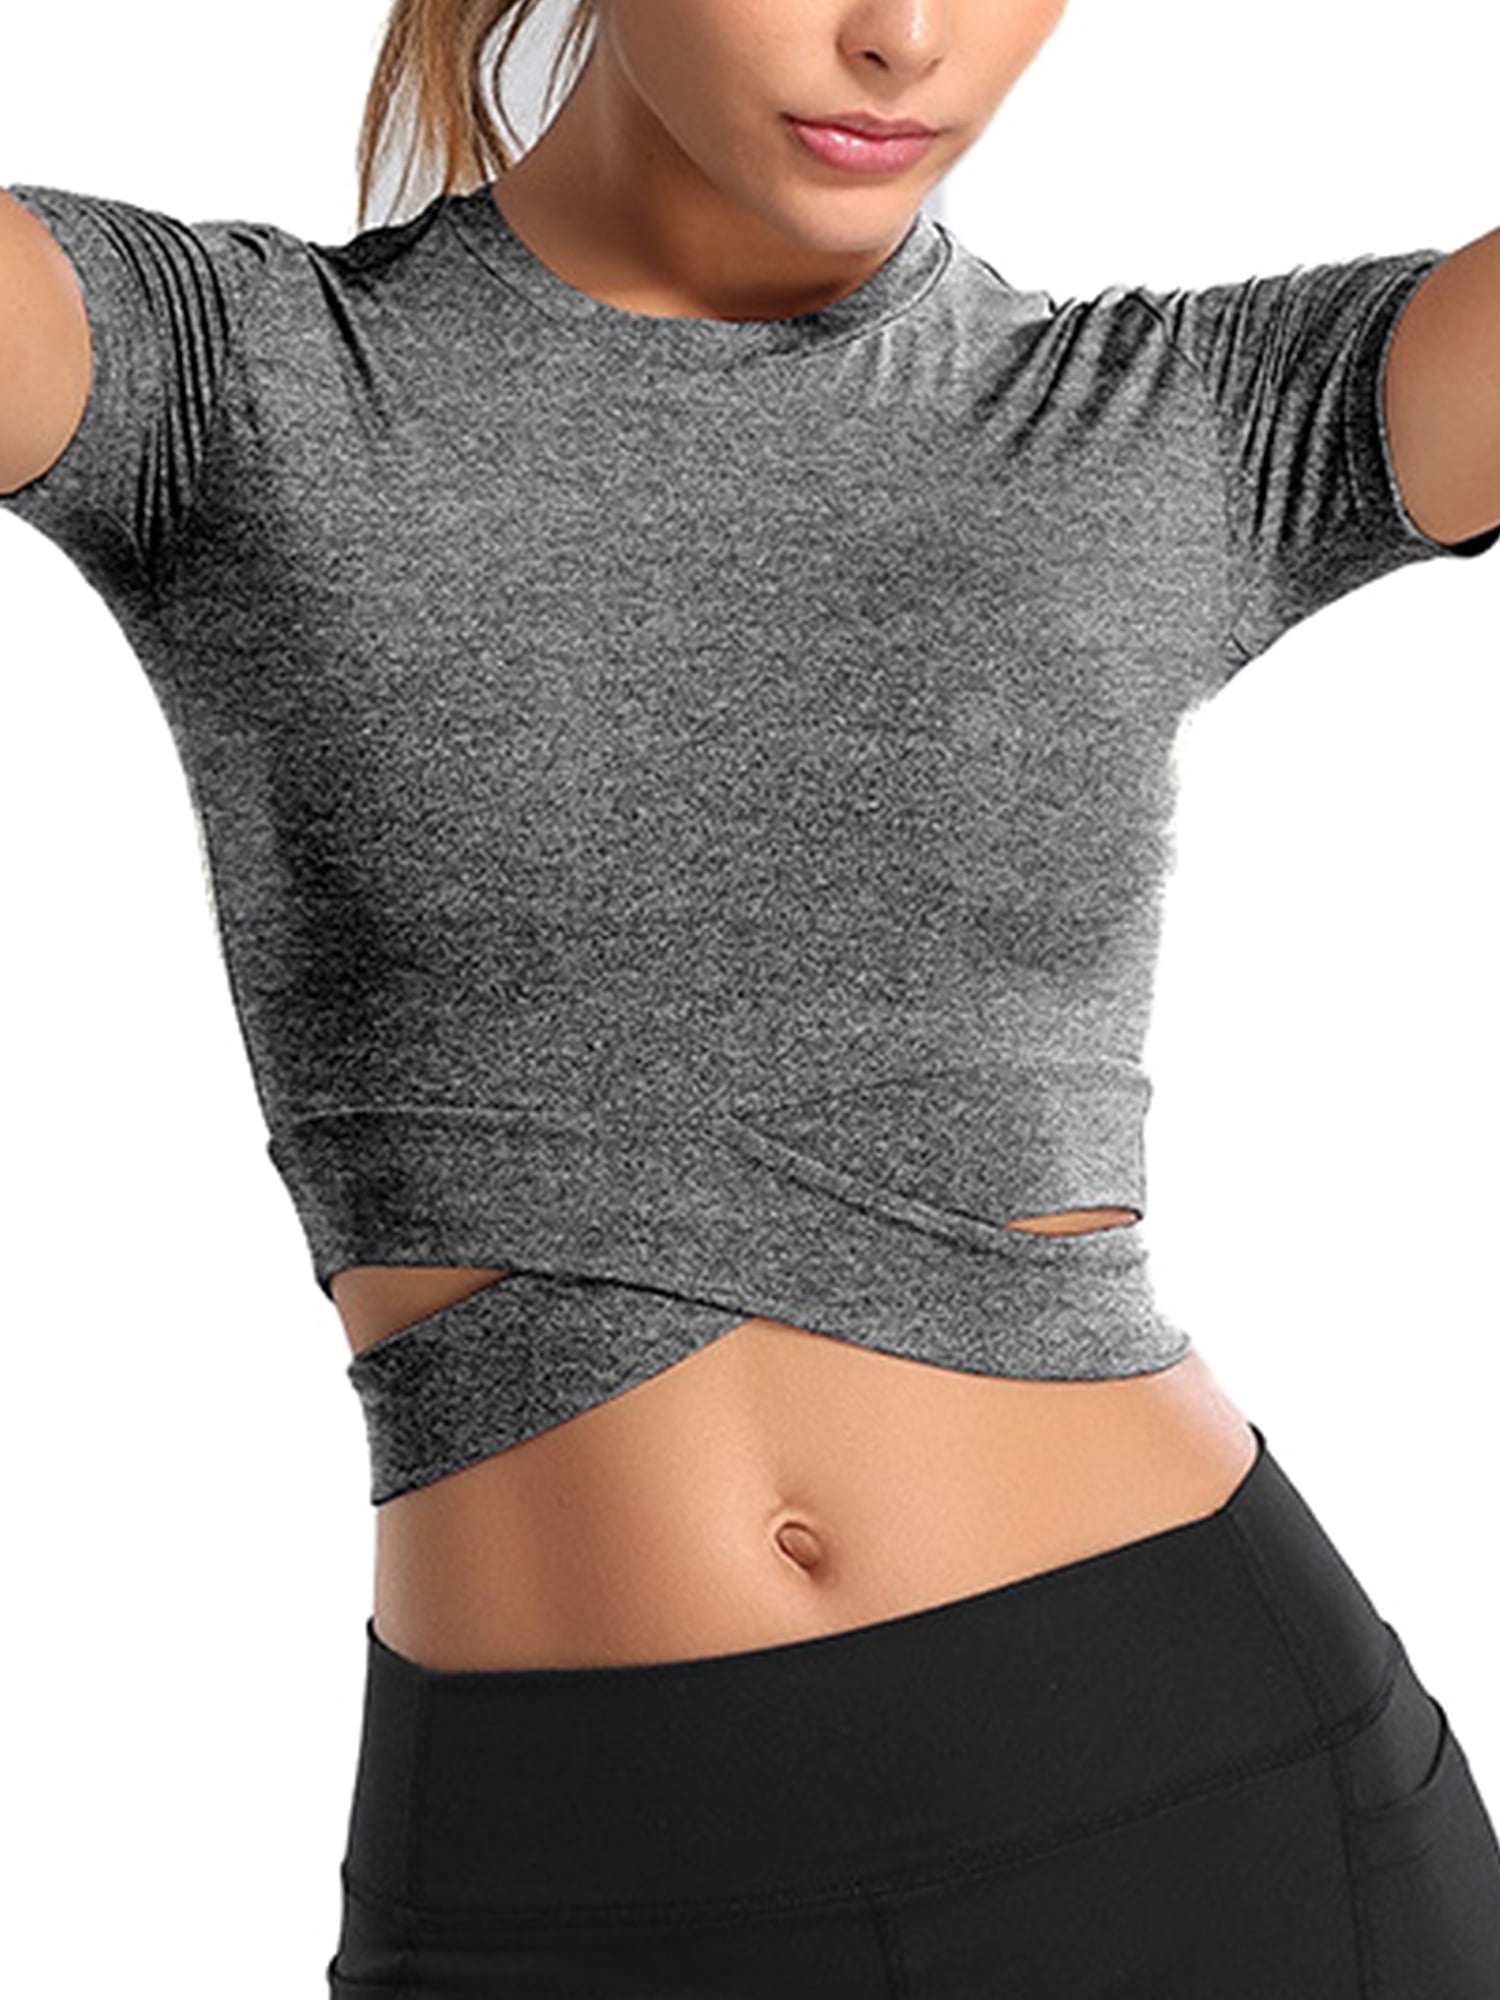  FREEYE Seamless Compression Crop Workout Tops Long Sleeve  Women, Gym Essentials Clothes Yoga Muscle Work Out Cropped Shirts Thumb  Holes Training Athletic Teen Girls Slim Fitted Sportswear Deep Red S 